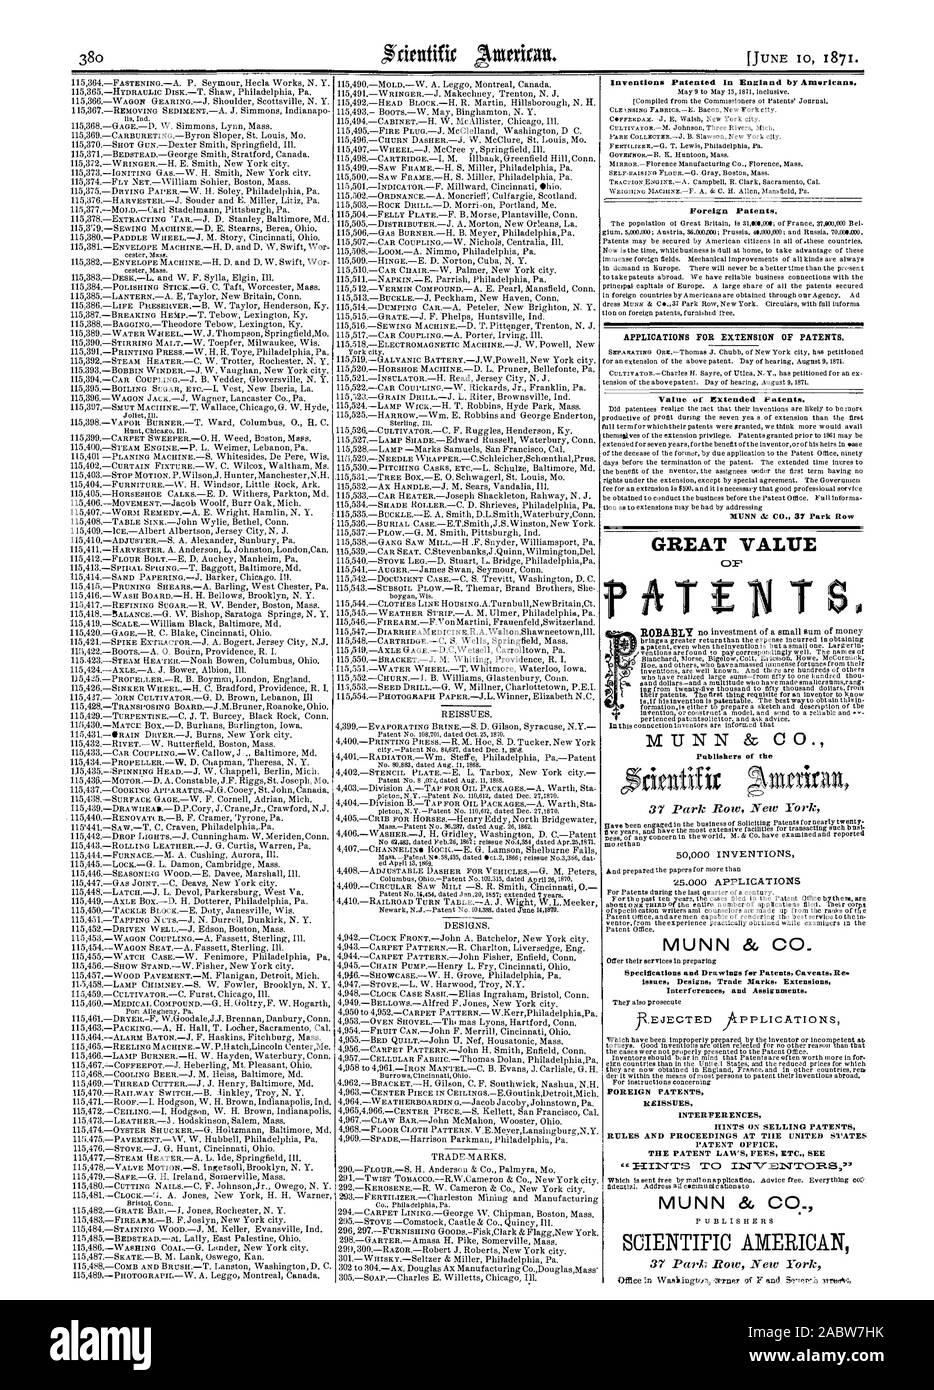 Inventions Patented In England by Americans. Foreign Patents APPLICATIONS FOR EXTENSION OF PATENTS. Value of Extended Patents. MUNN & C 37 Park Row GREAT VALUE MUNN & CO. Publishers of the 50000 INVENTIONS 25000 APPLICATIONS MUNN & CO. Specifications and Drawings for Patents Caveats Re. Interferences and Assignments. FOREIGN PATENTS REISSUES INTERFERENCES HINTS ON SELLING PATENTS RULES AND PROCEEDINGS AT THE UNITED SVATES PATENT OFFICE THE PATENT LAWS FEES ETC. SEE . SCIENTIFIC AMERICAN, 1871-06-10 Stock Photo